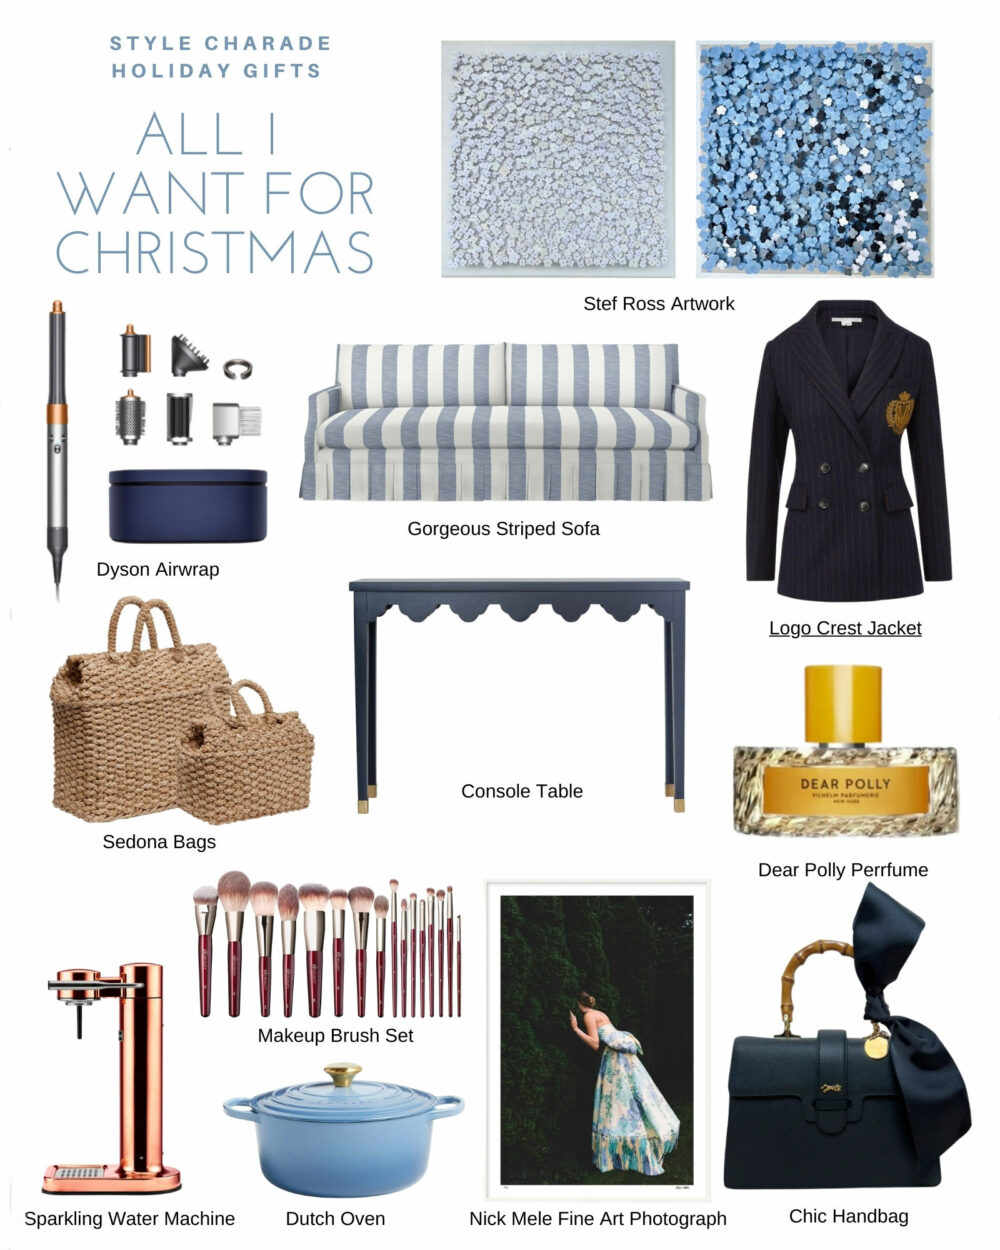 Style Charade Holiday Gift Guide